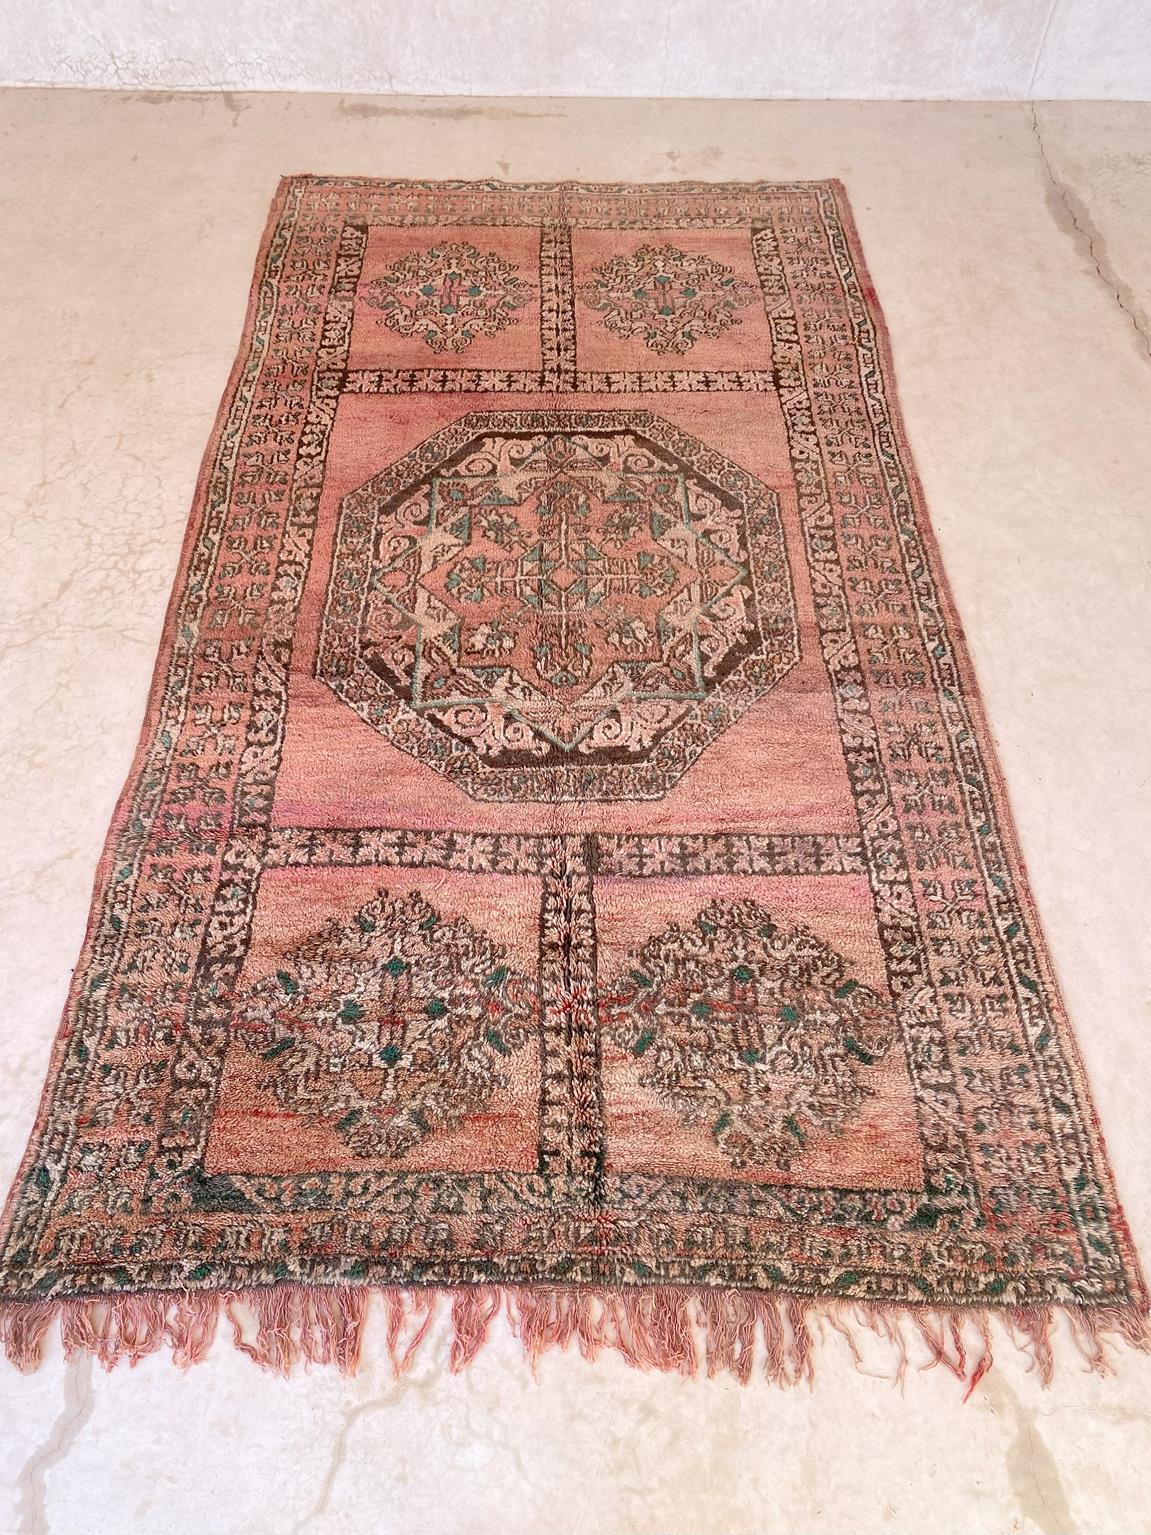 I selected this large, vintage Ait Yacoub rug from piles of carpets because I think that it's a lovely piece with such sweet colors and a great bohemian vibe! The composition of the rug is typical from that tribe, with a central floral design